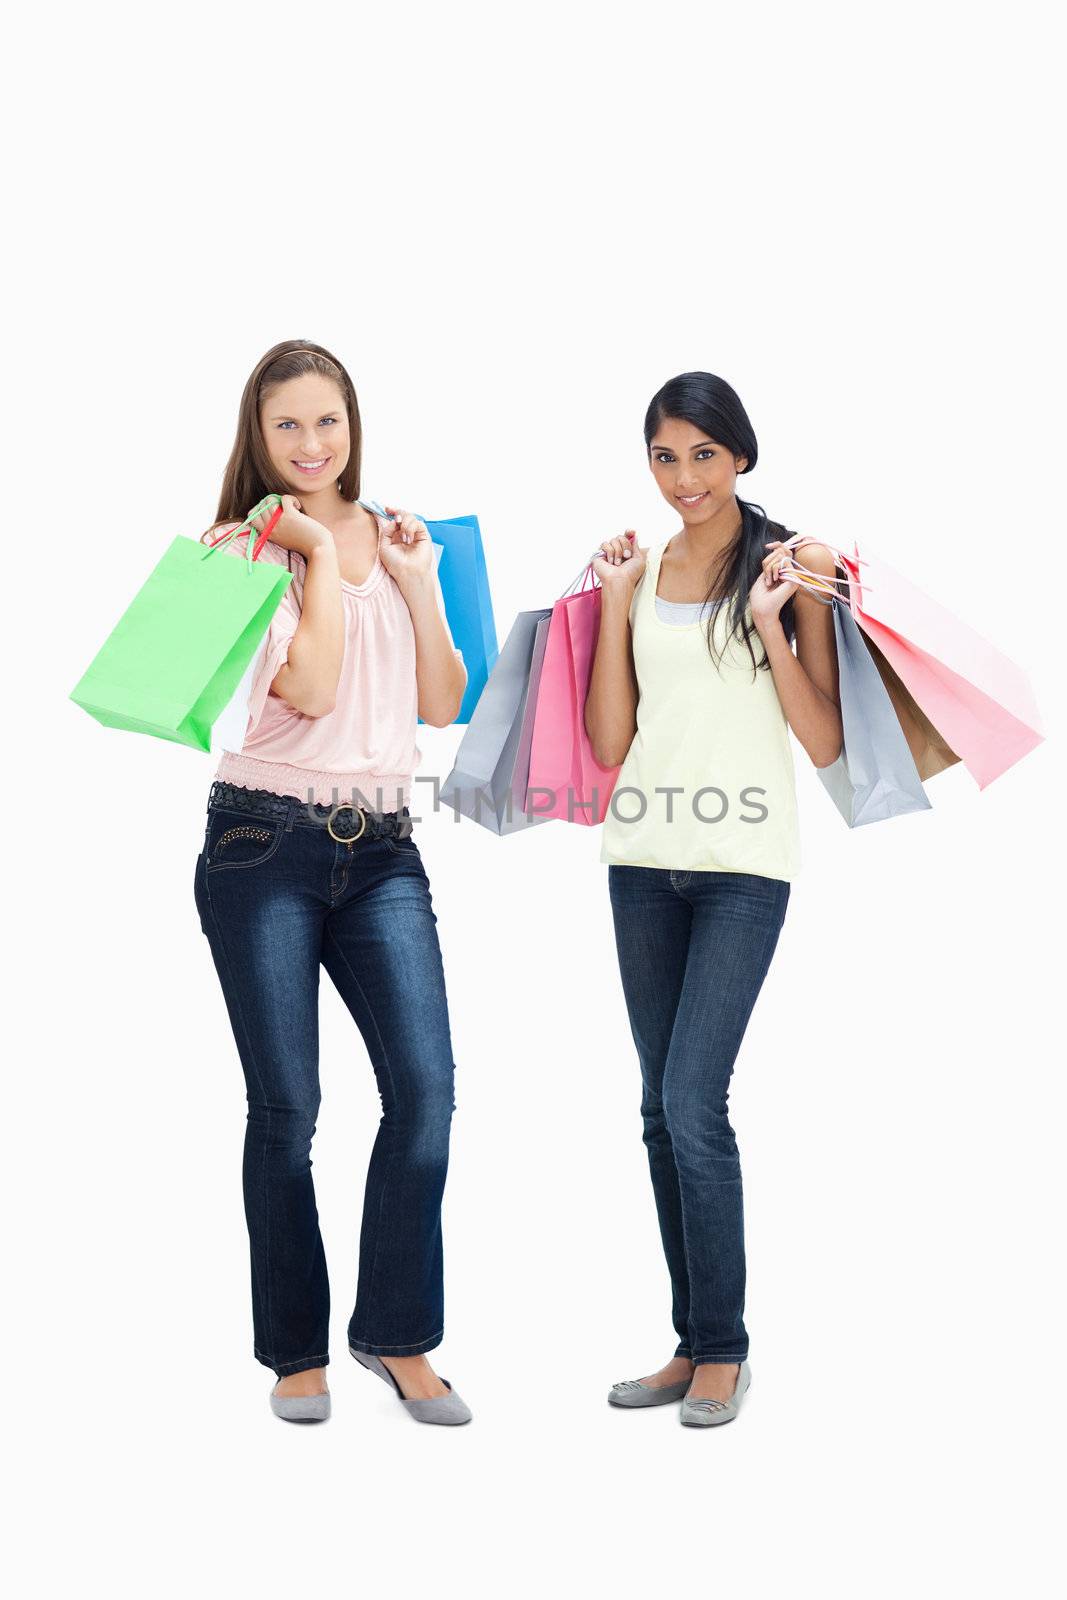 Girls smiling with shopping bags against white background